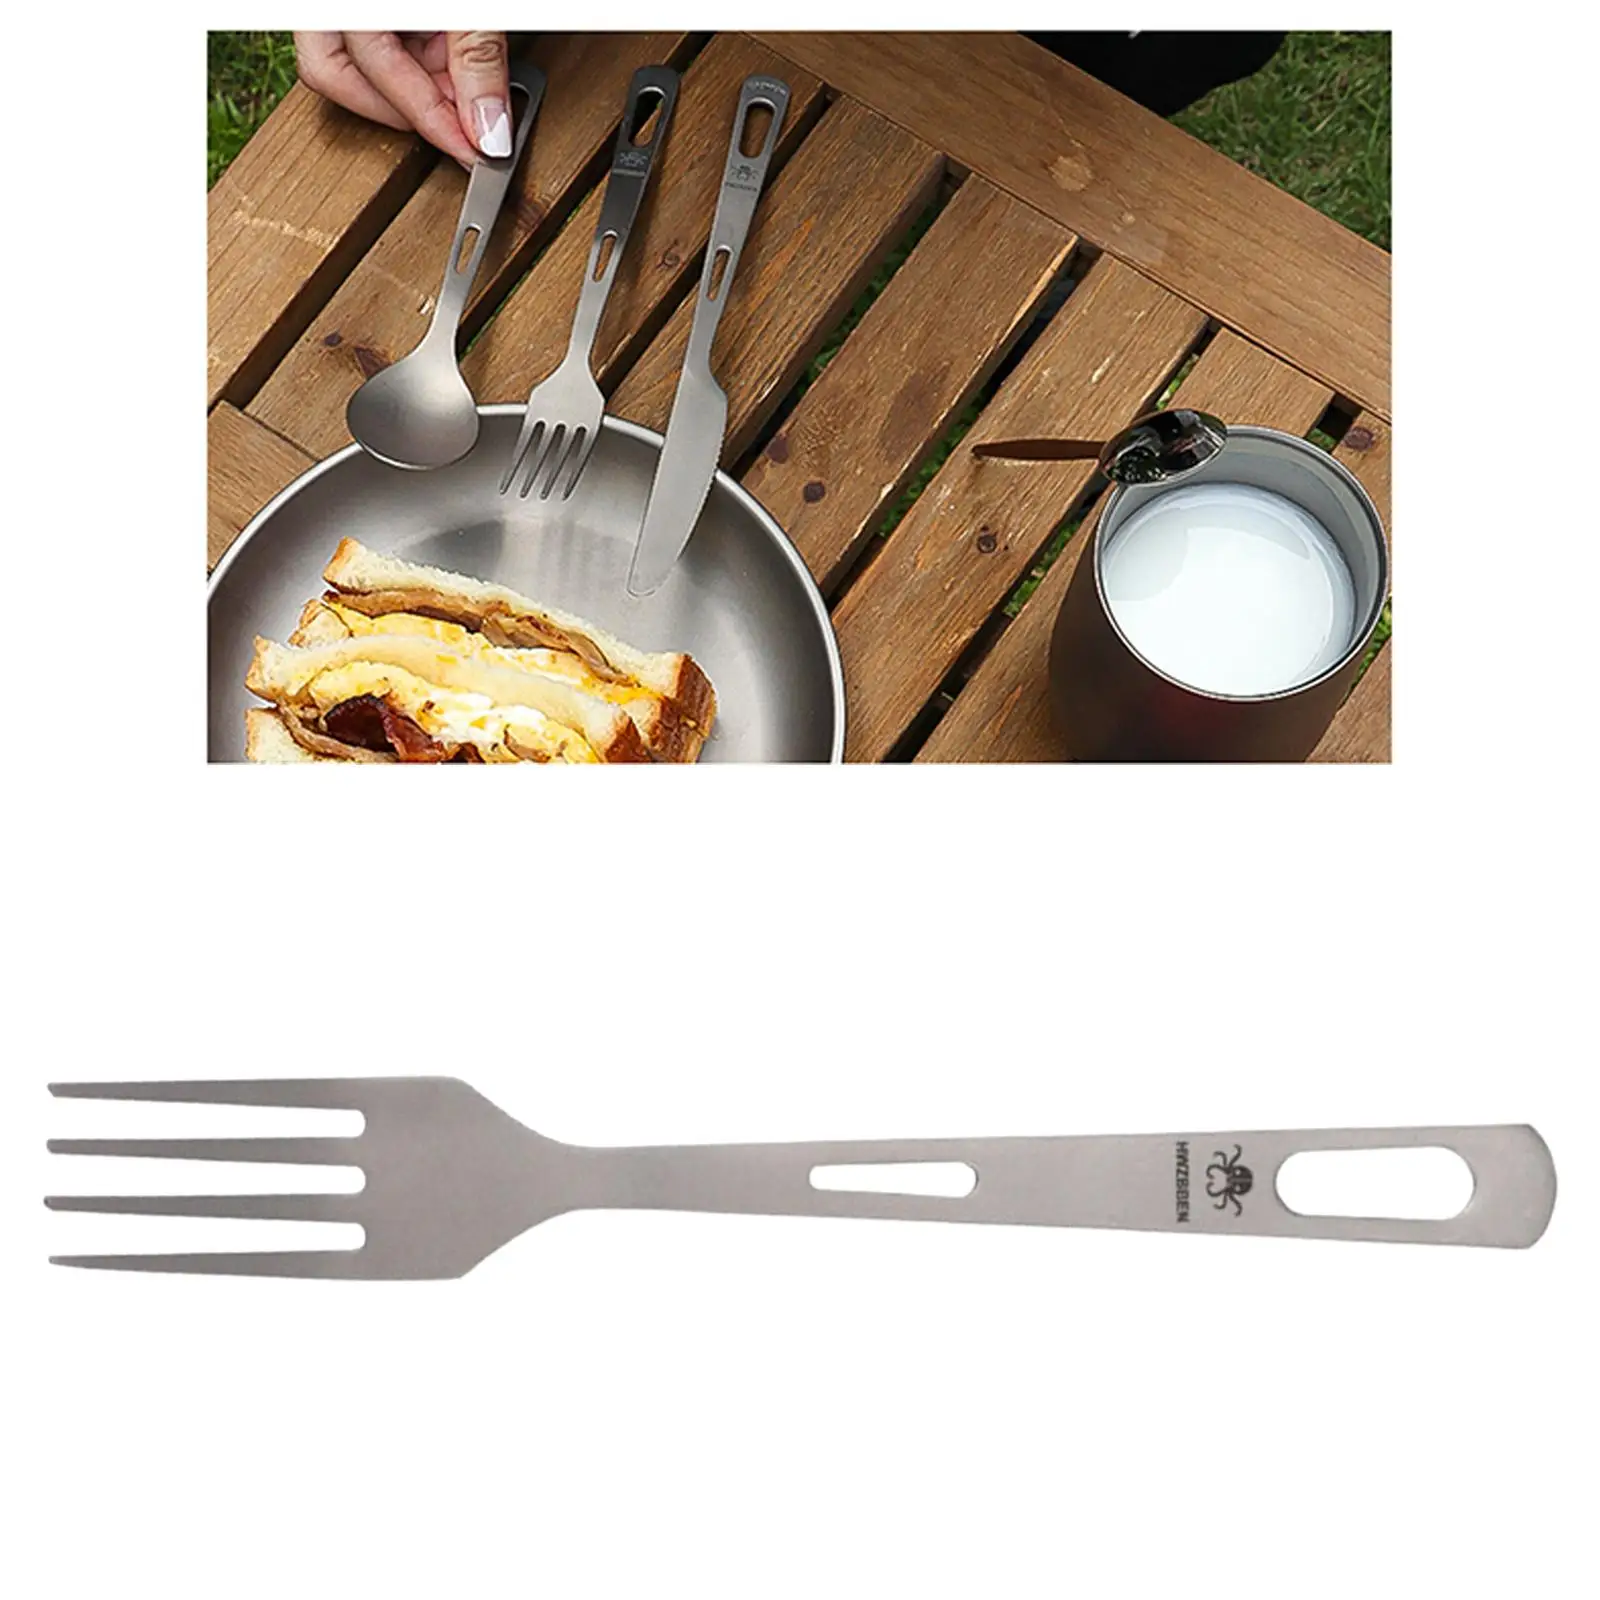 Camping Accessories Cooking Shovel Folding Spatula Spoon Slotted Spoon Food Turner for Hiking Picnic Outdoor Camping Hiking BBQ